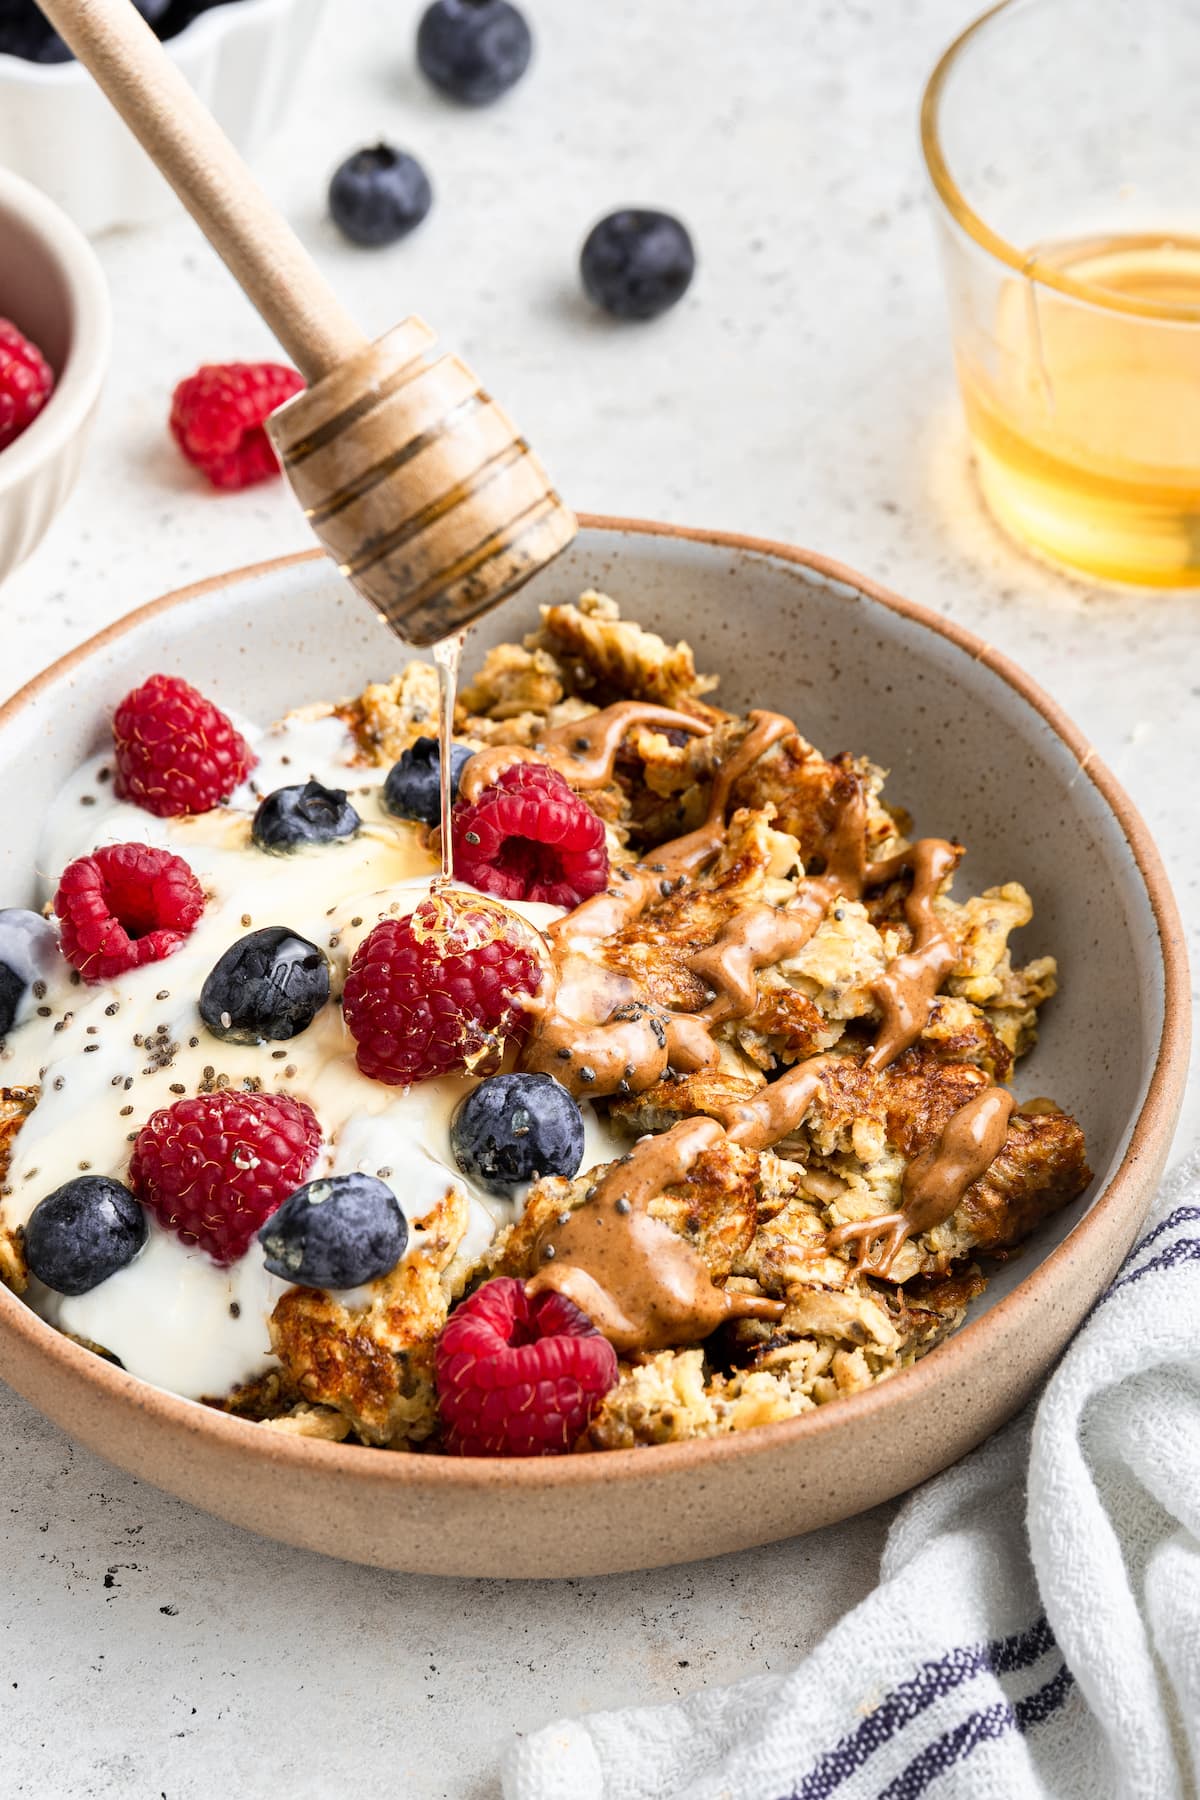 Honey is drizzled into a bowl of scrambled oats with a scoop of yogurt, chia seeds, fresh berries, and almond butter on top.